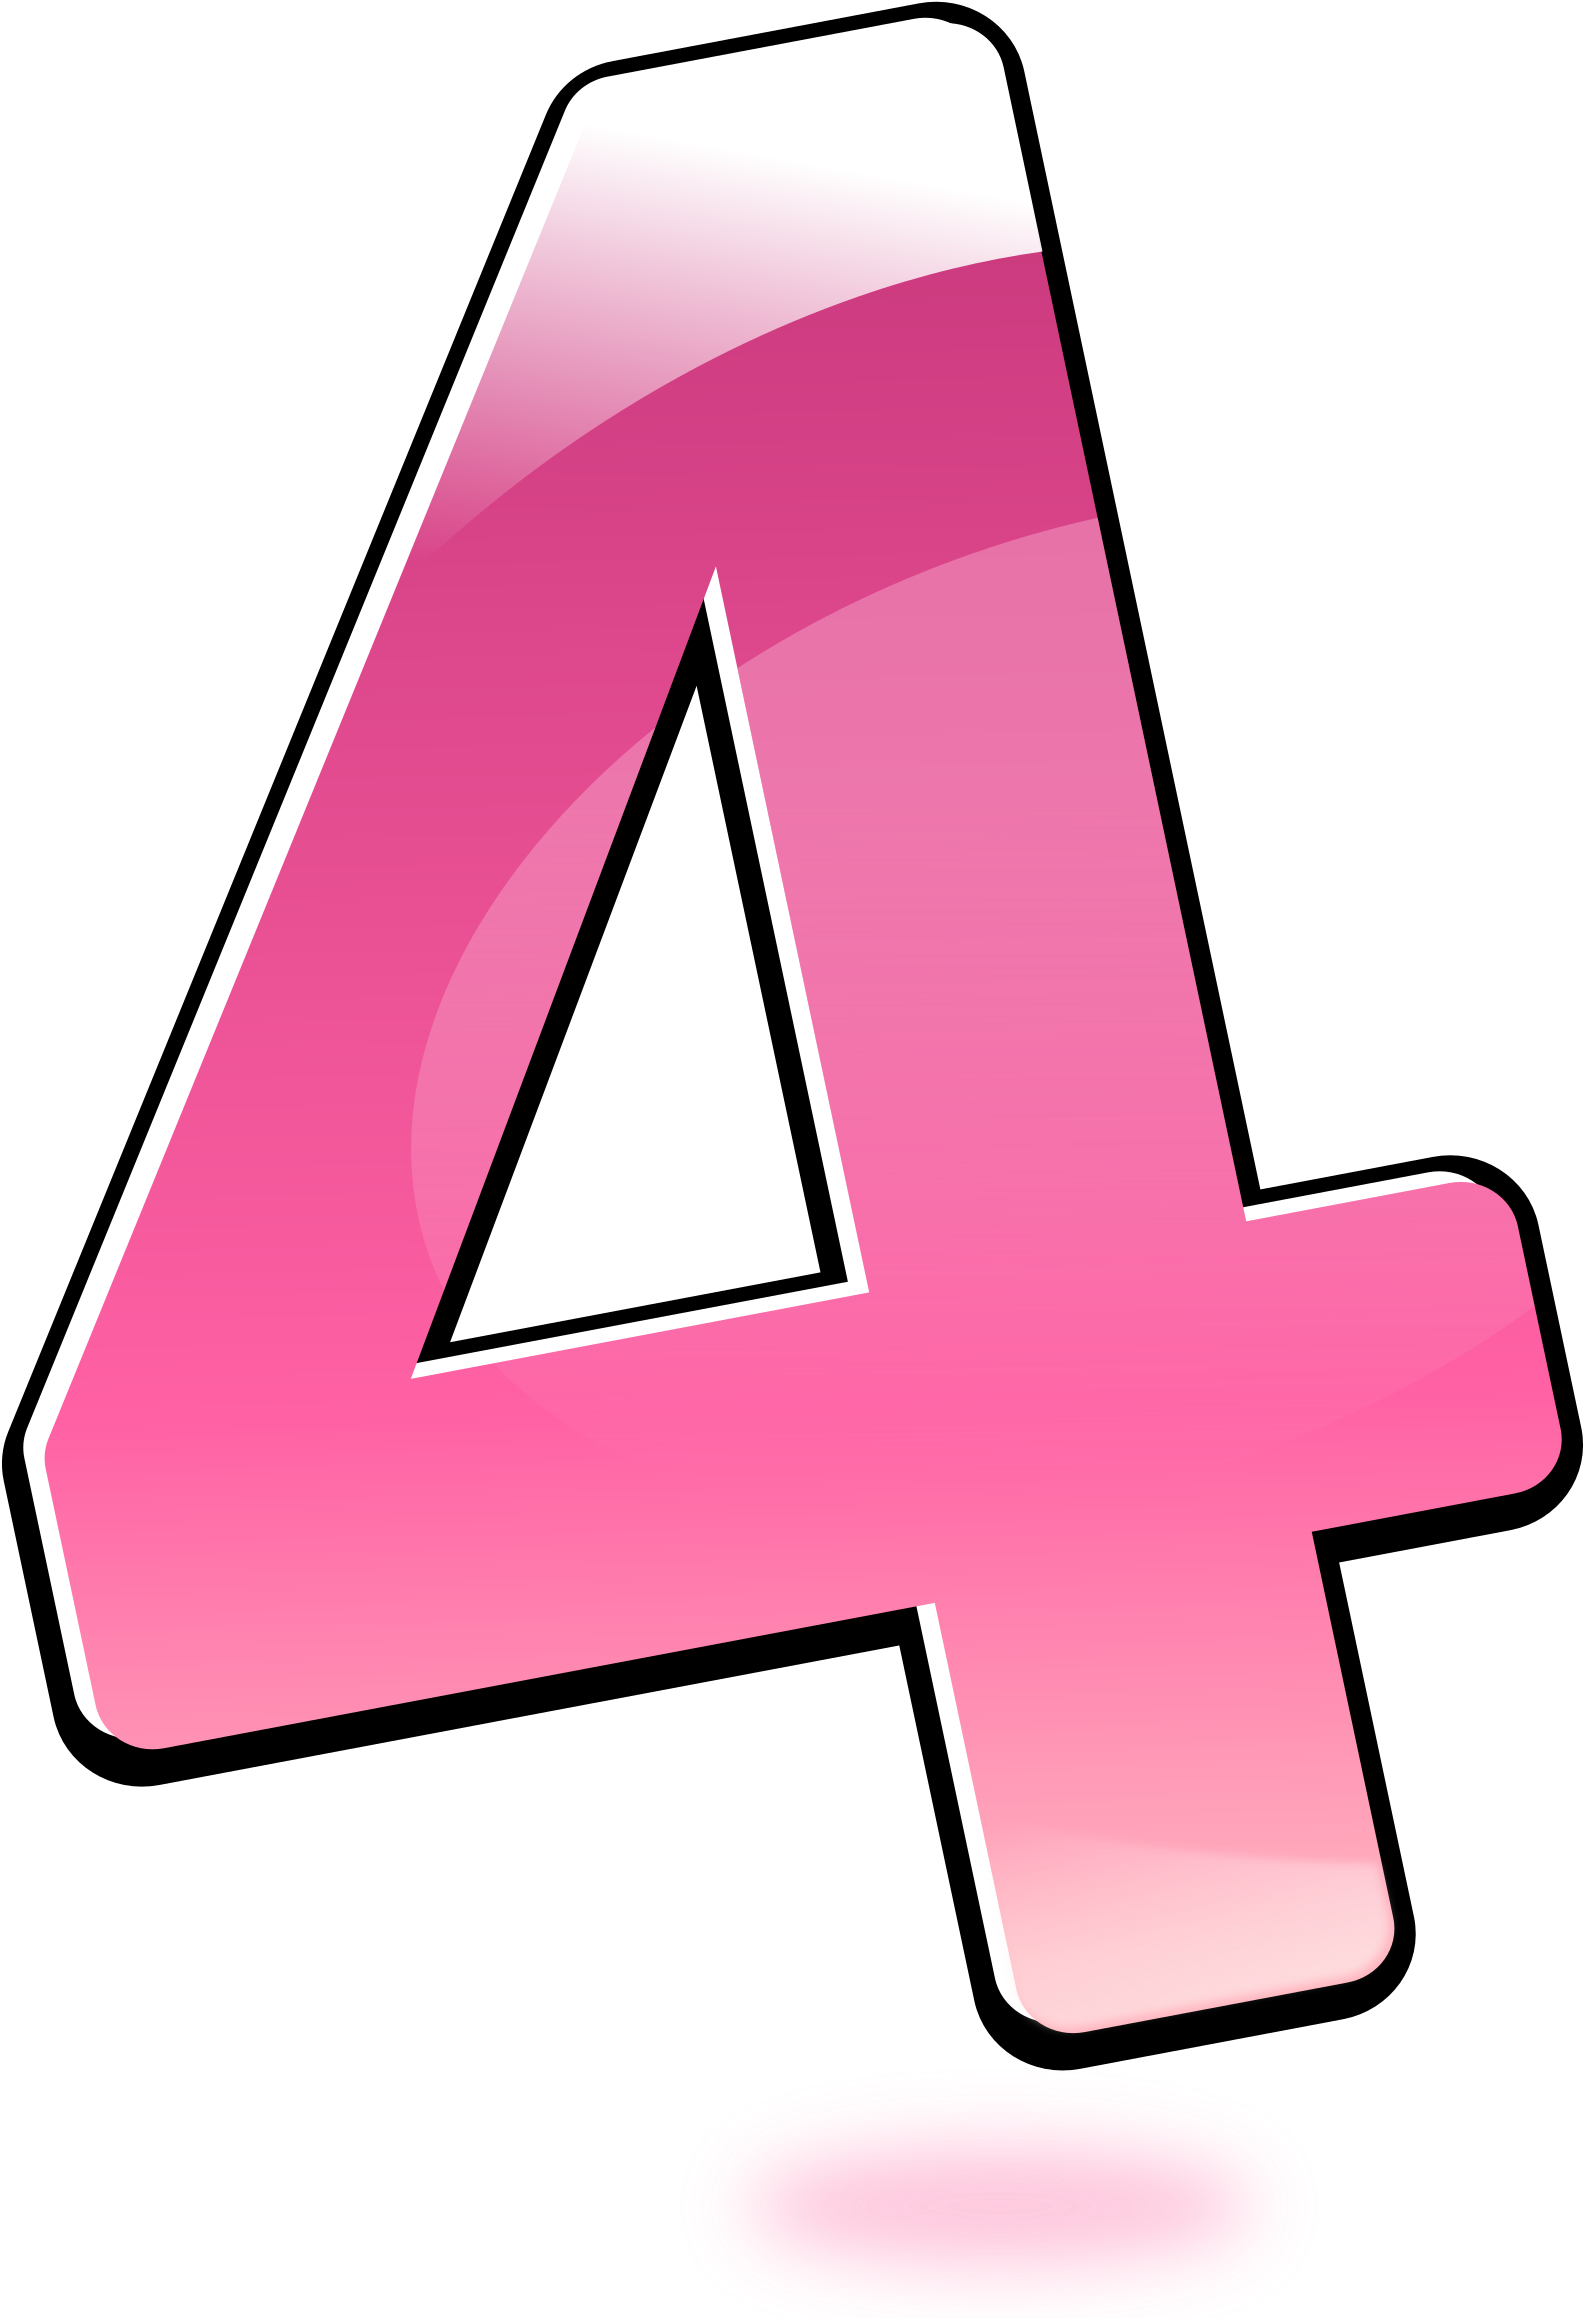 A Pink Number On A Black Background